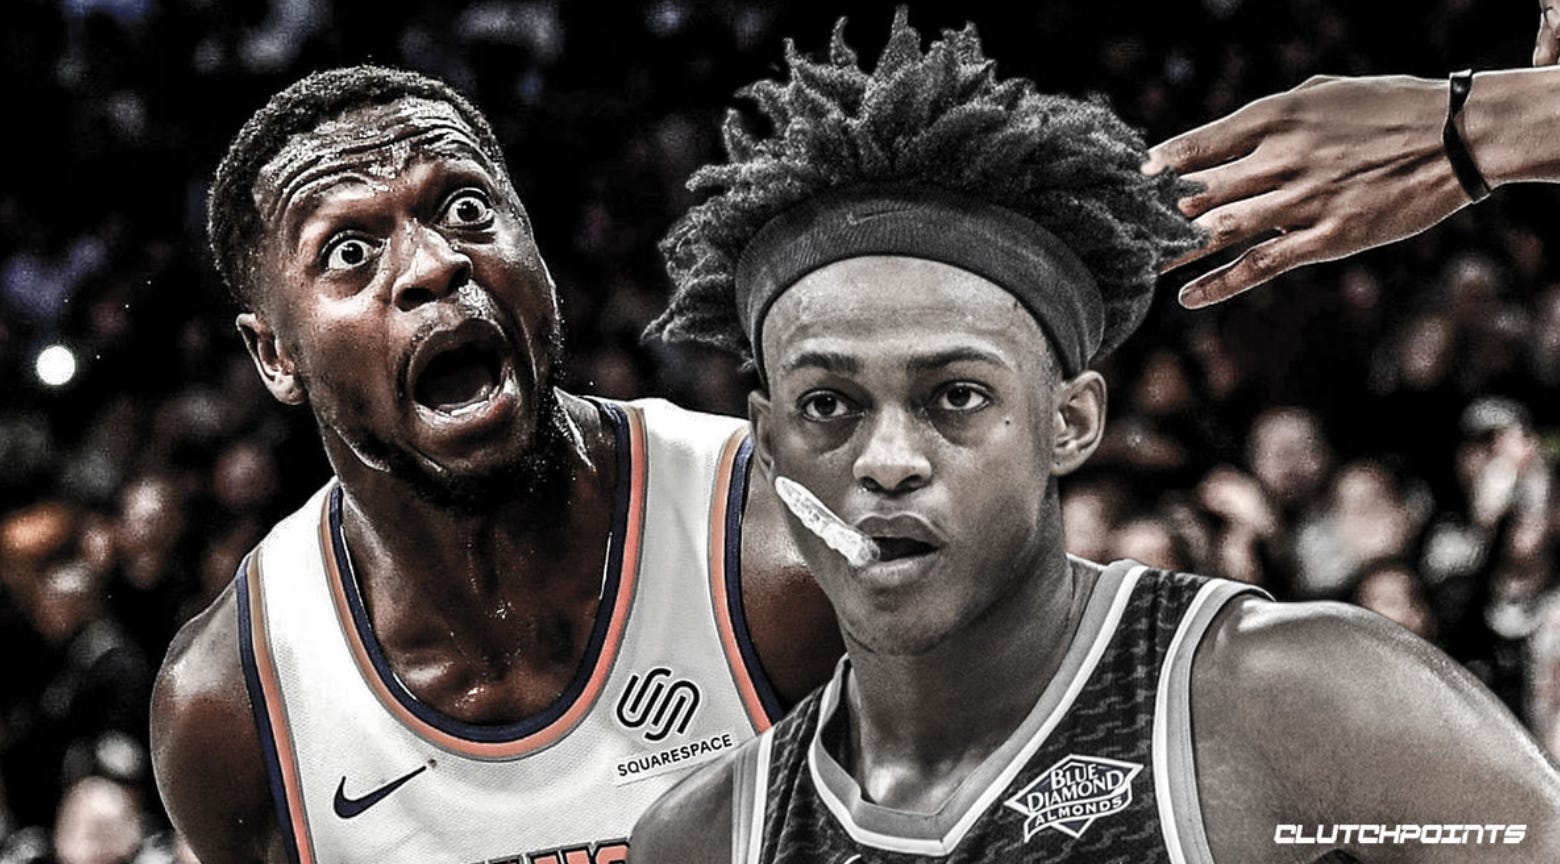 Campaign to Send De'Aaron Fox and Buddy Hield to the All-Star Game